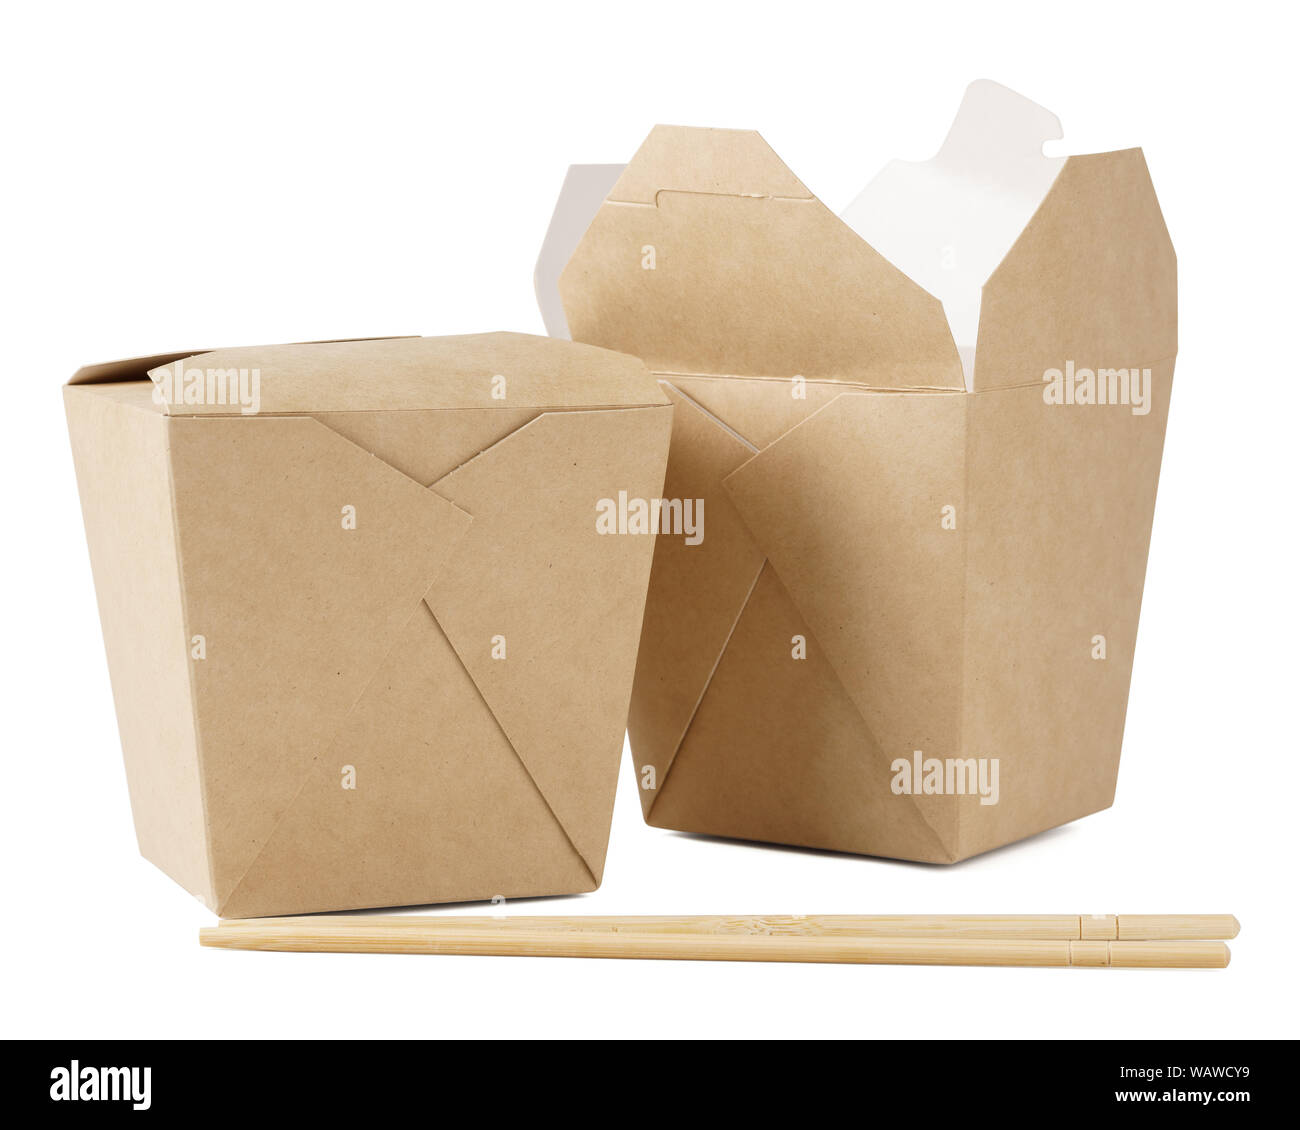 Fast Food Packaging Cardboard Container Filled Crispy Golden Takeaway French  Stock Photo by ©PantherMediaSeller 338368414